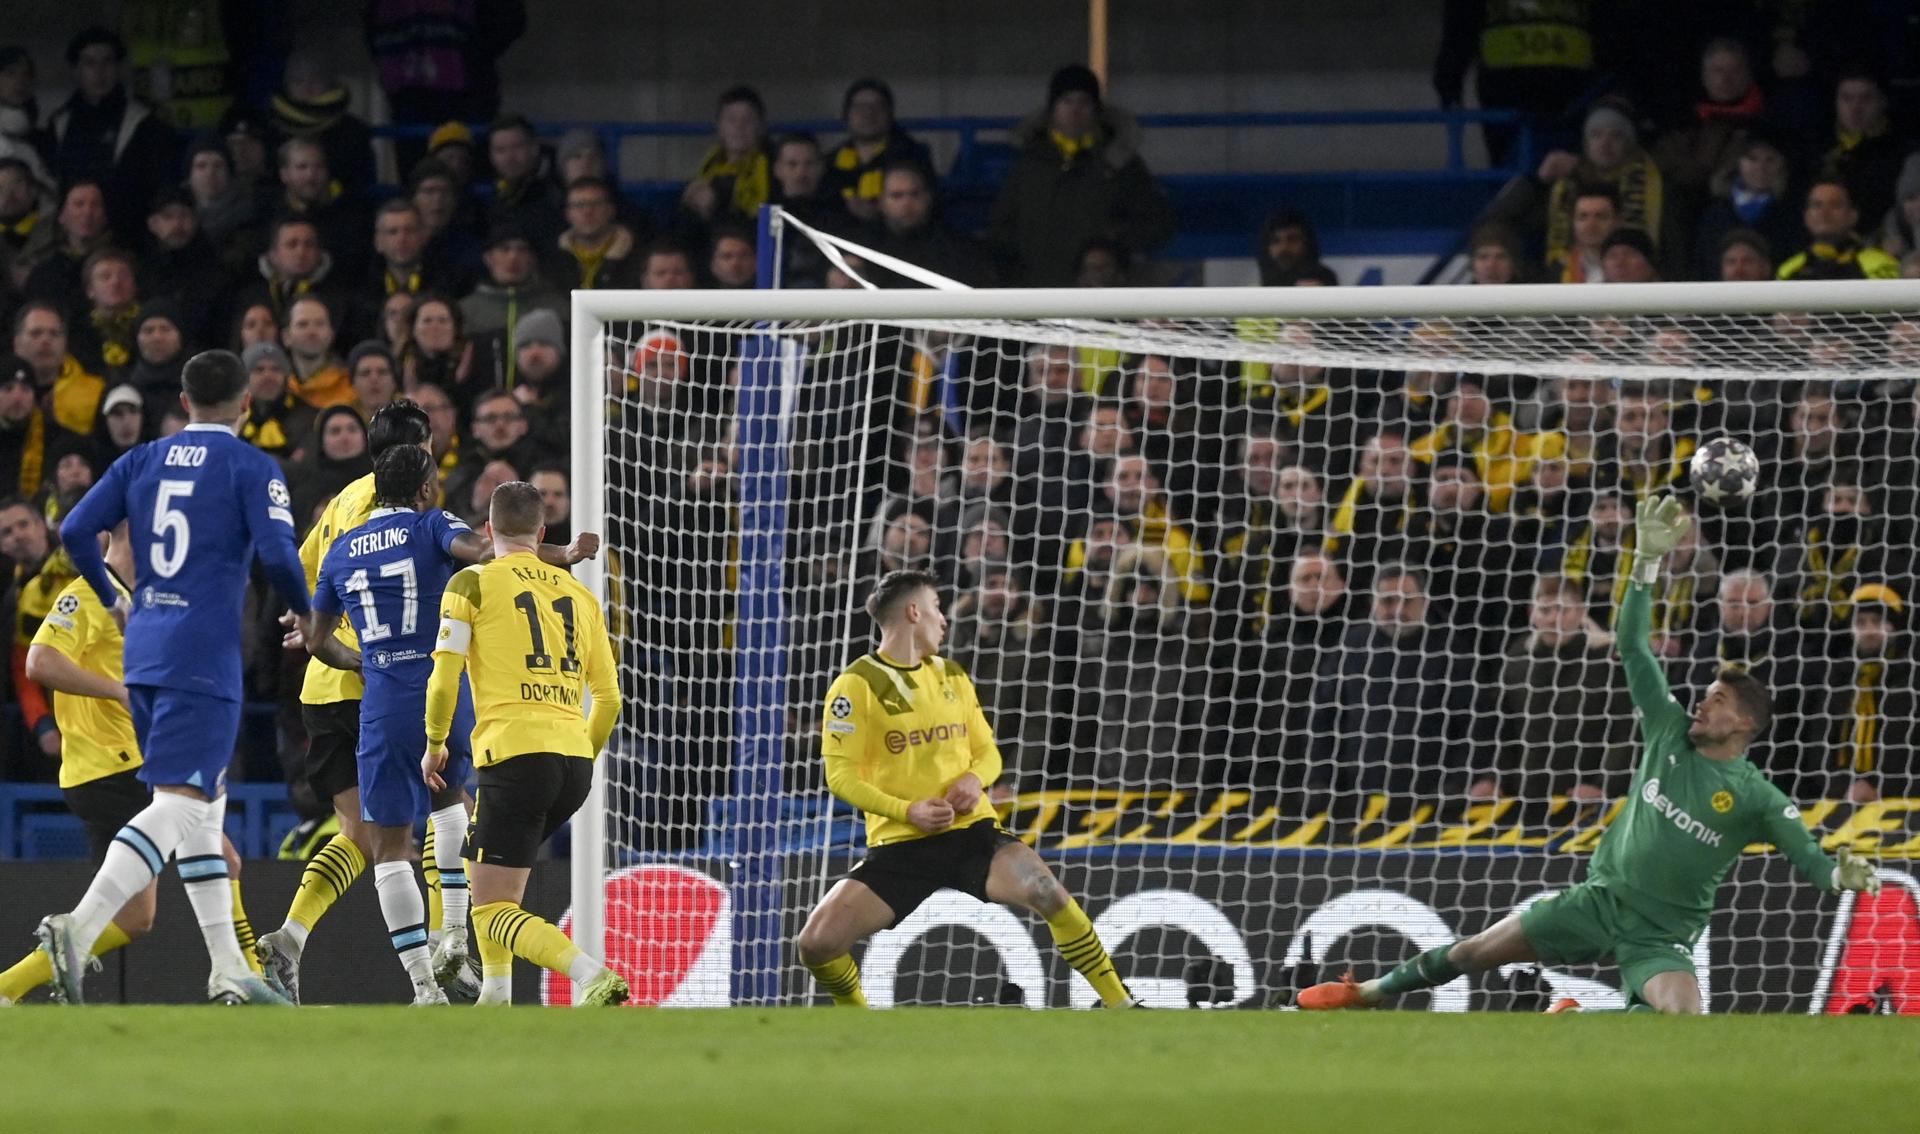 Chelsea's Raheem Sterling (No. 17) beats Borussia Dortmund goalkepeer Alexander Meyer (R) during the UEFA Champions League round of 16 second leg in London on 7 March 2023. EFE/EPA/Neil Hall